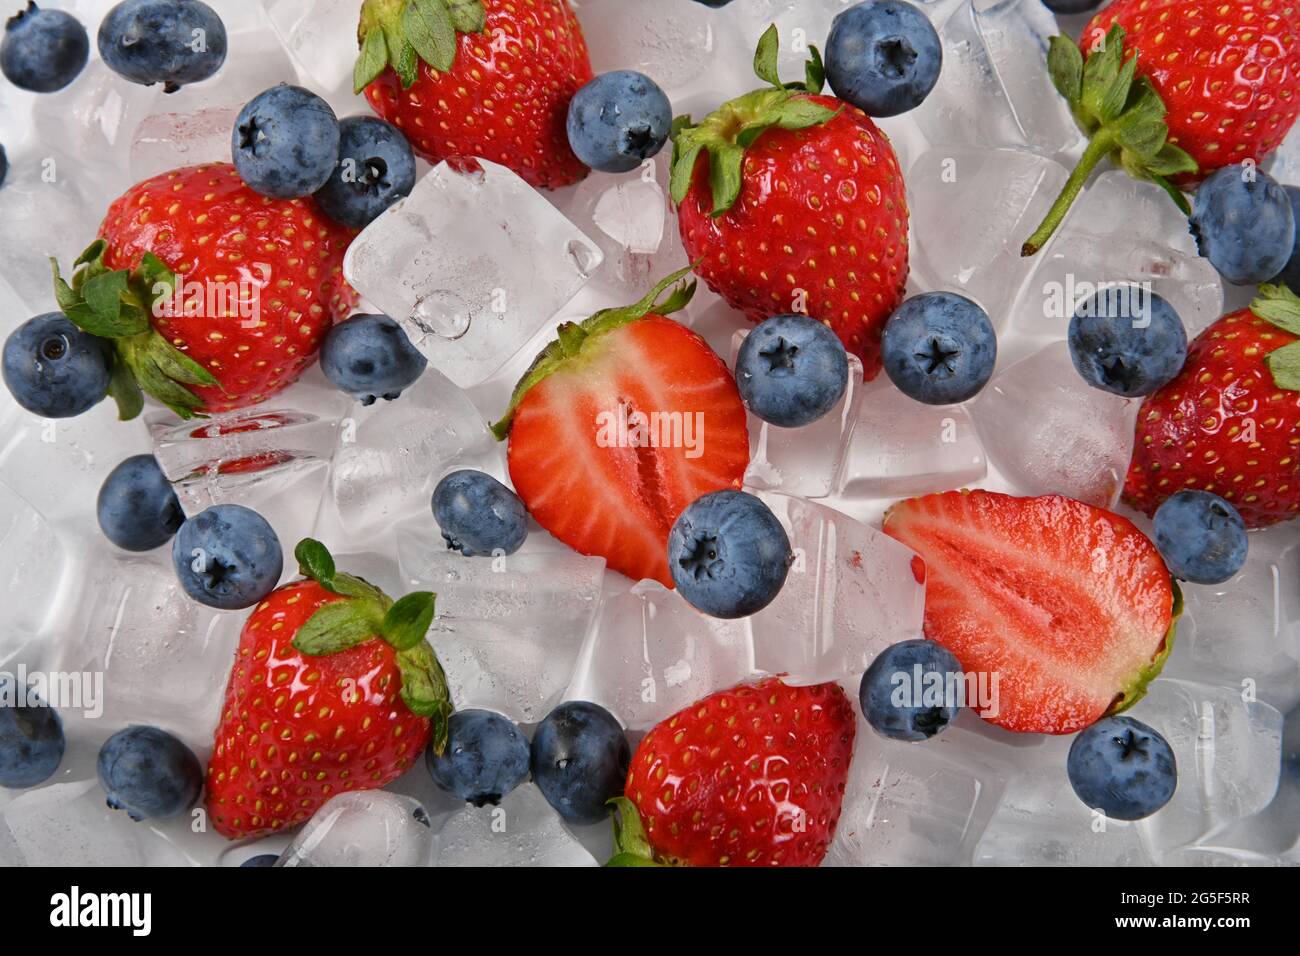 Close up fresh red ripe strawberries, blueberries and ice cubes on table, elevated high angle view, directly above Stock Photo